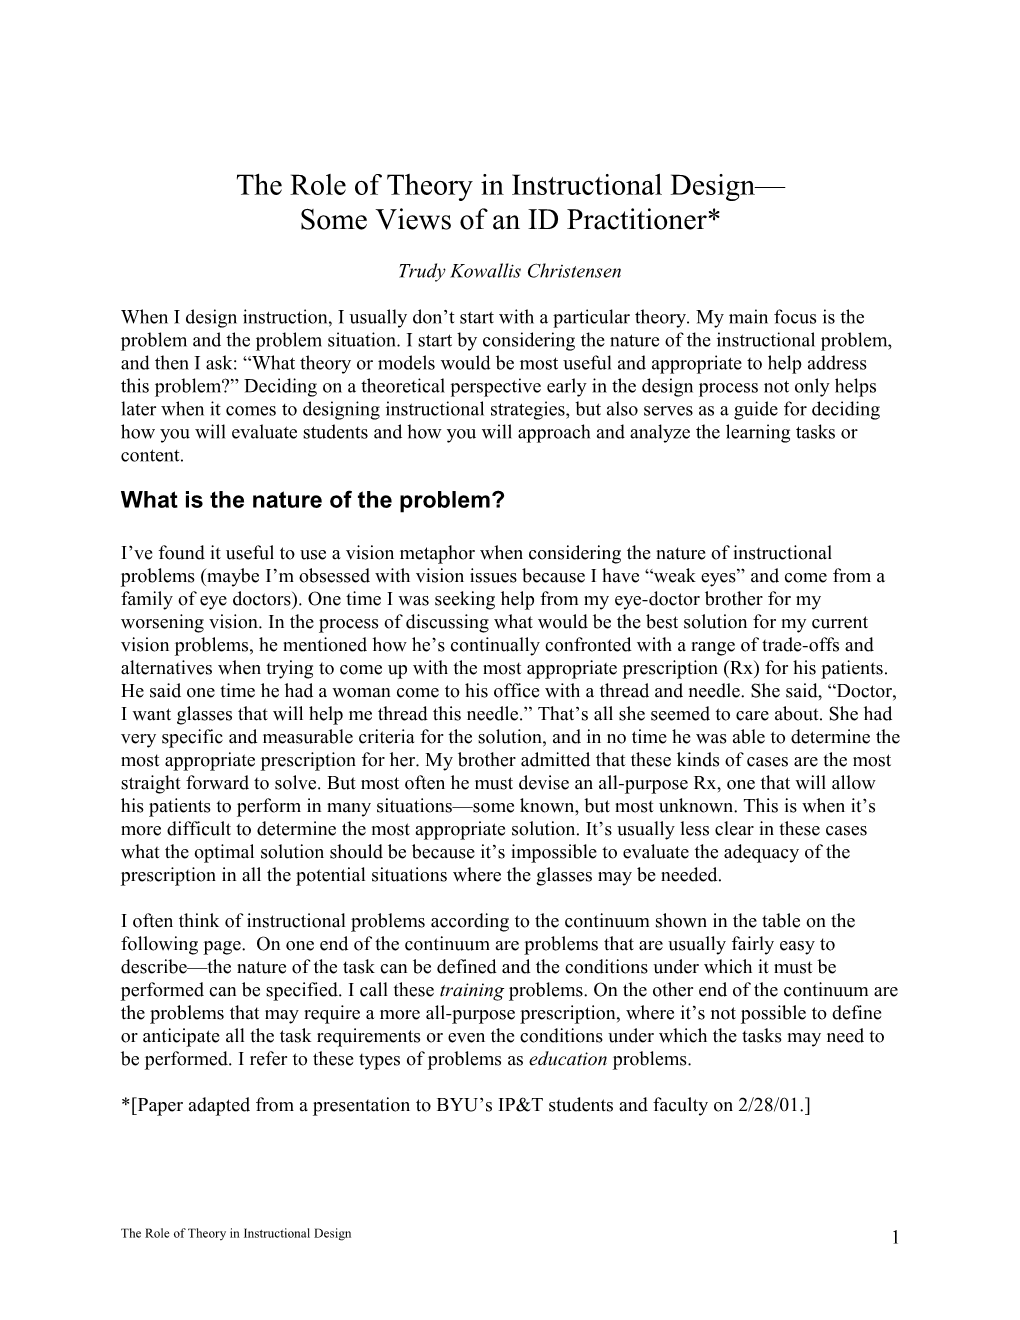 The Role of Learning Theory in Instructional Design